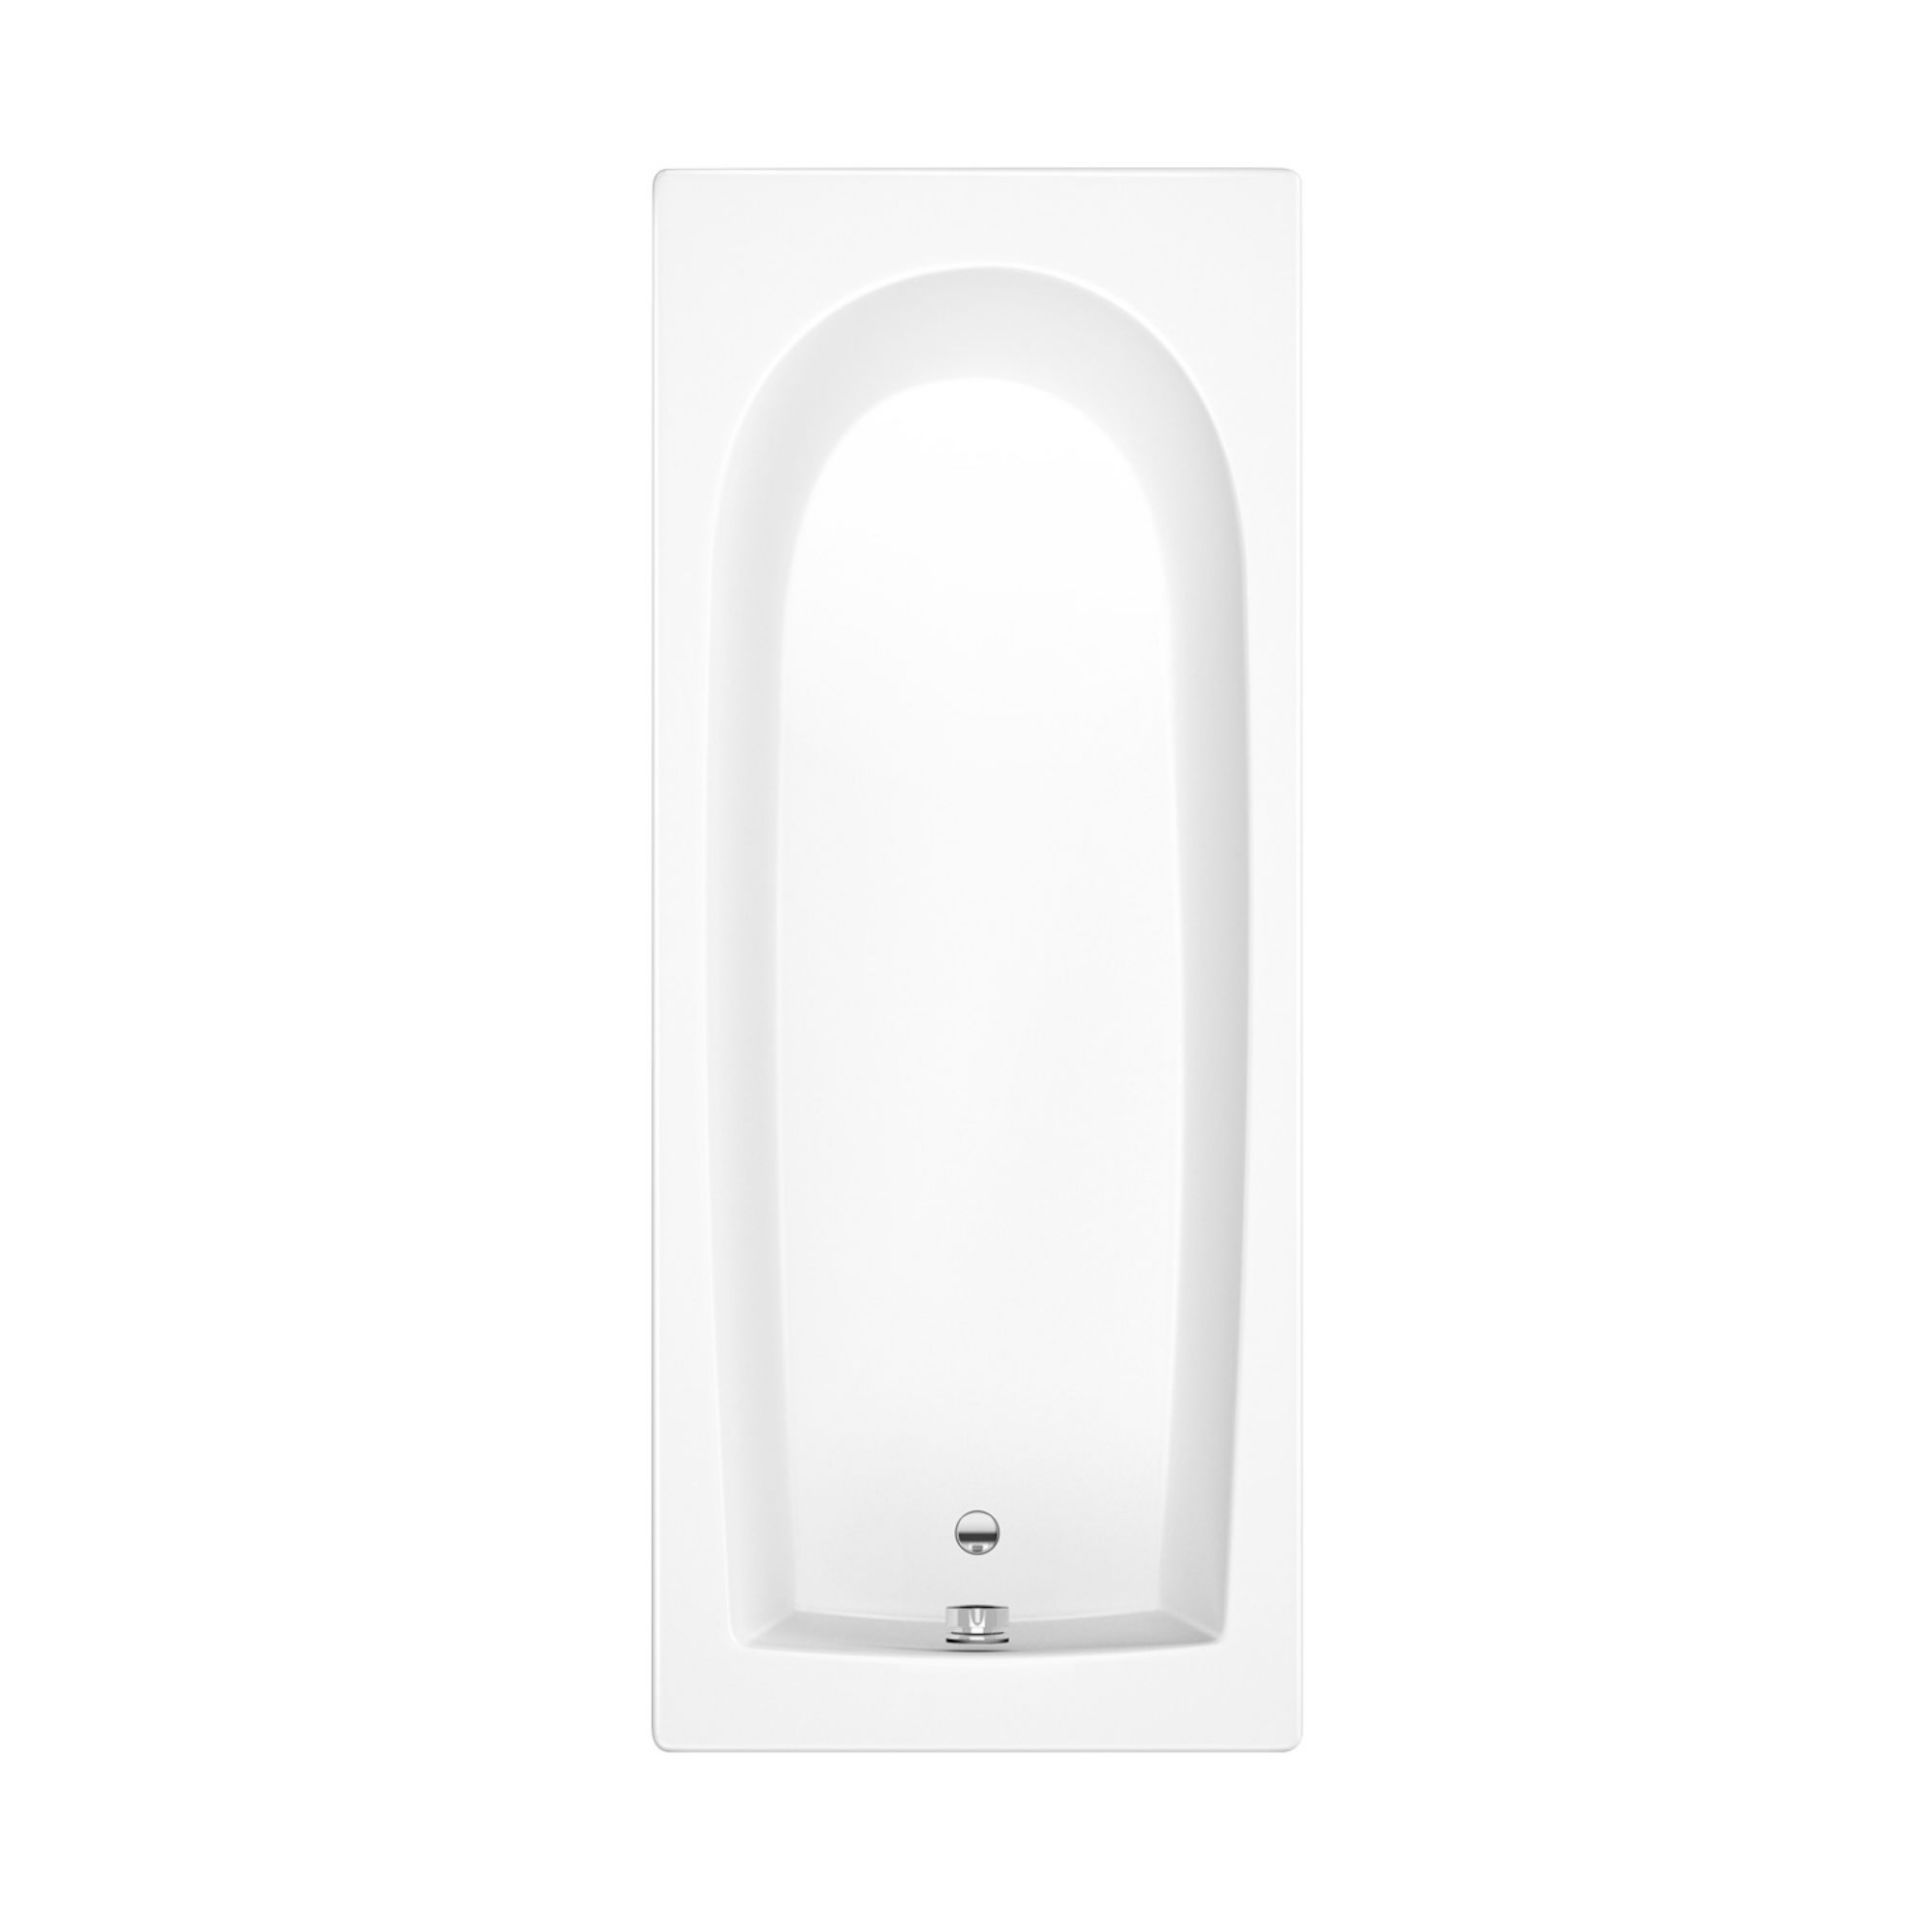 (KL131) 1500 x 700mm Round Single Ended Bath. RRP £332.99. Comes complete with side and end panel. - Image 2 of 3